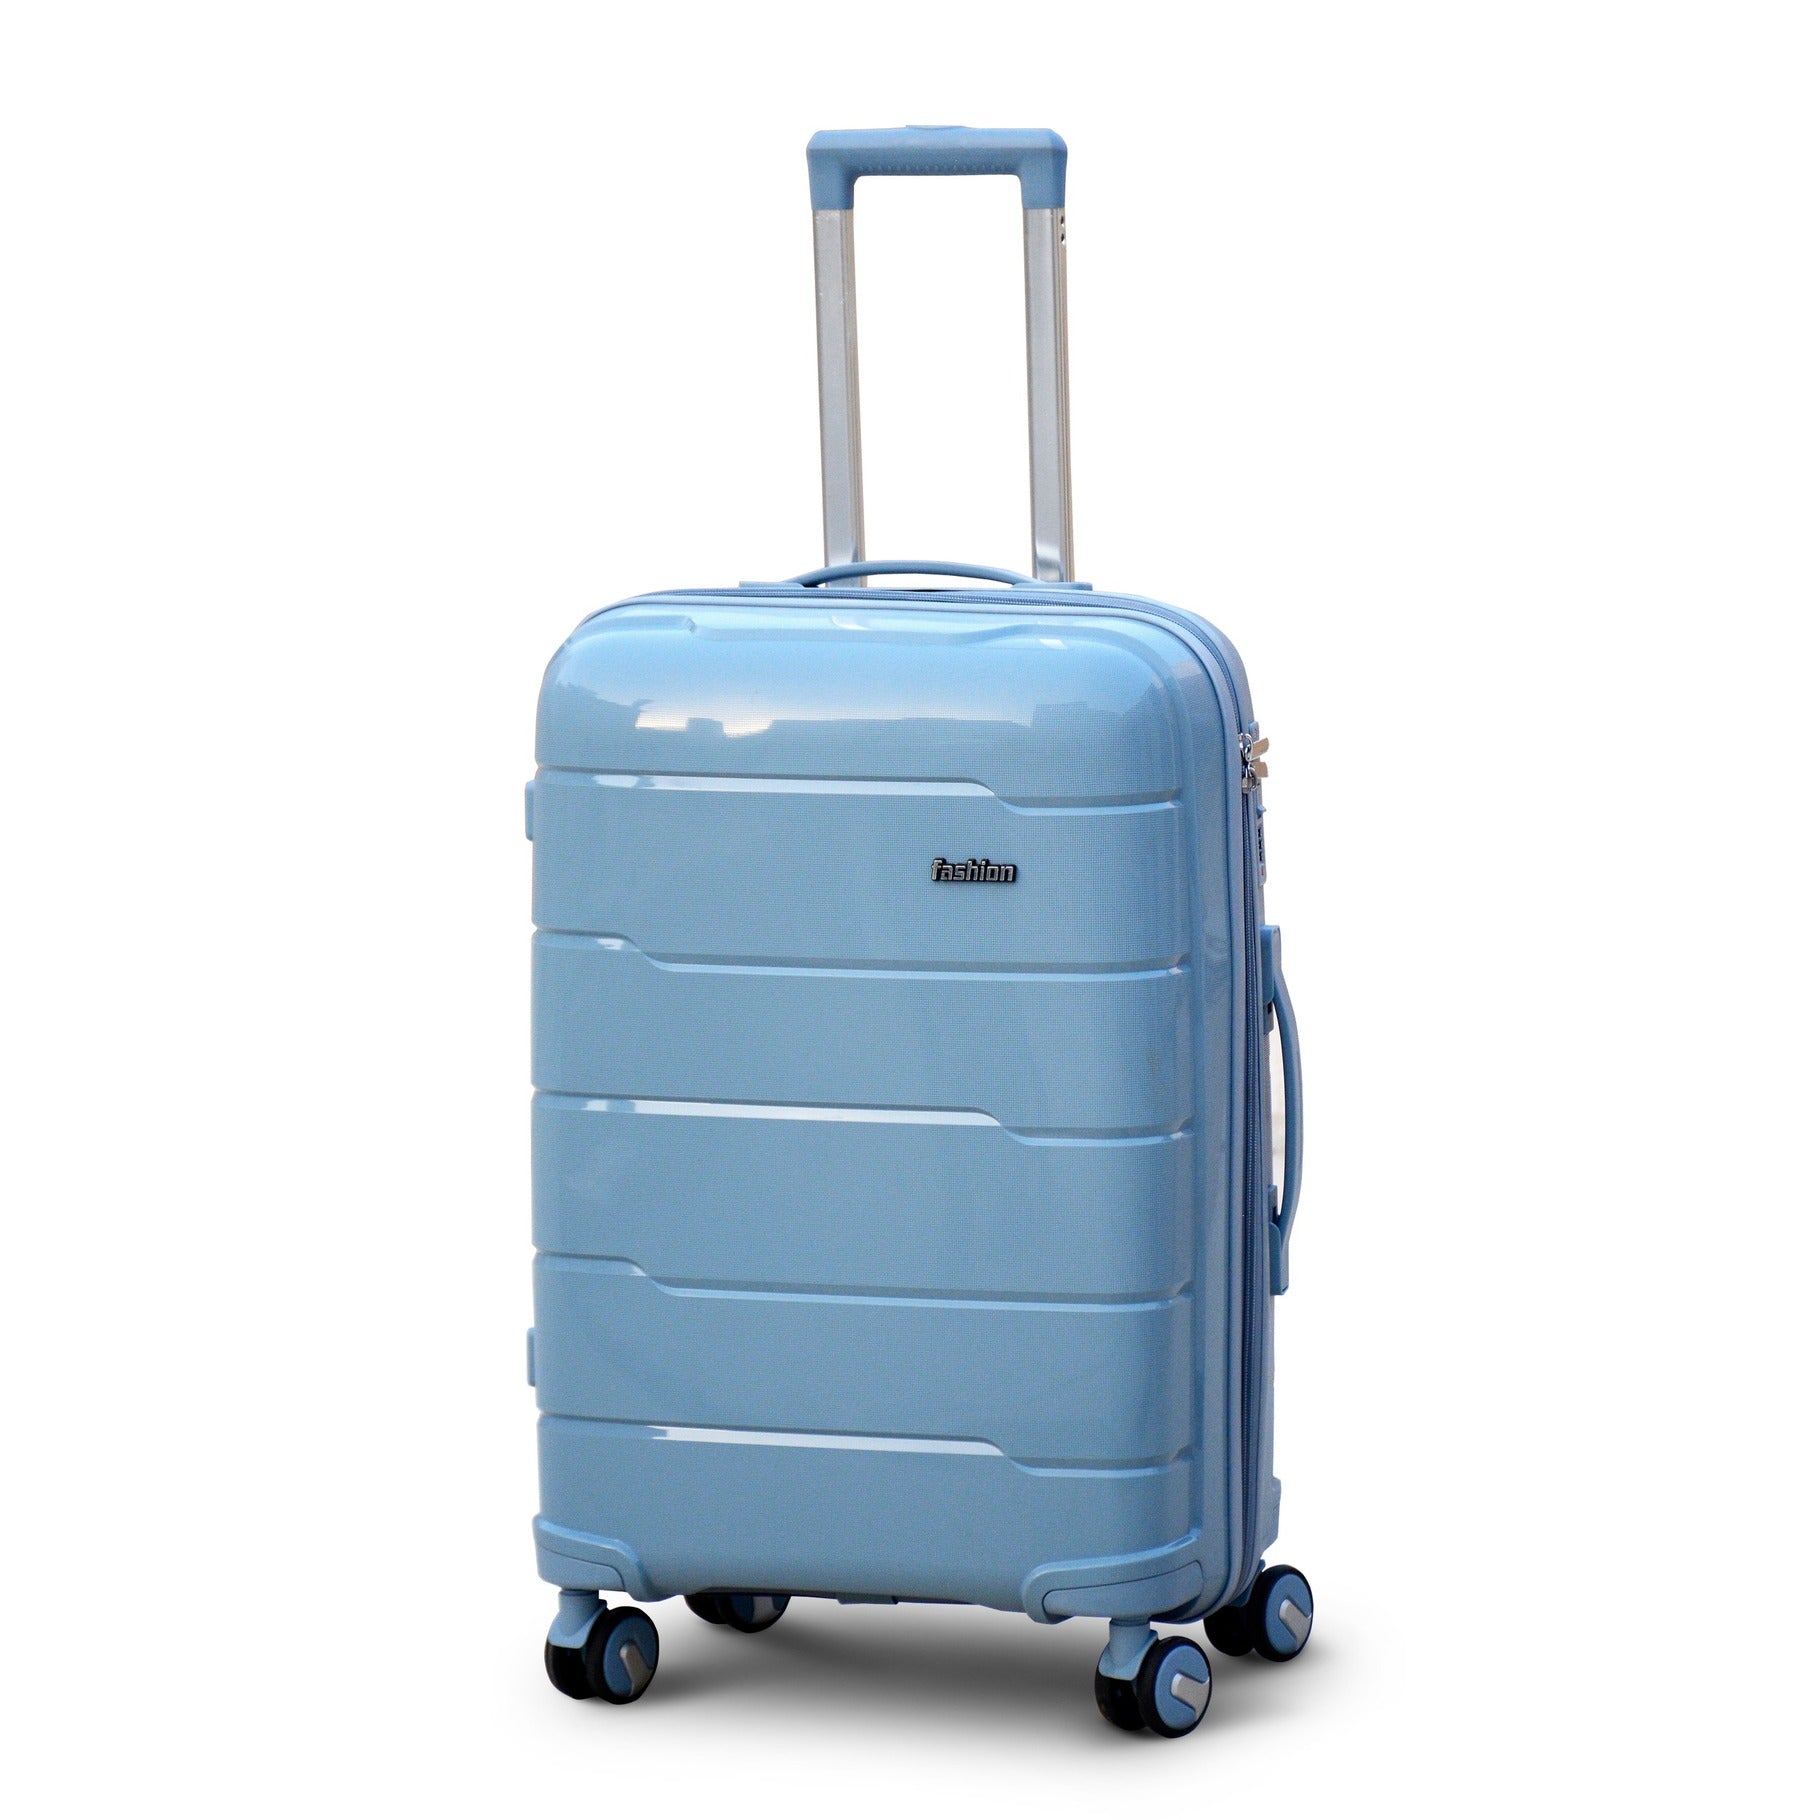 Grey Ceramic PP lightweight Luggage With Double Spinner Wheel